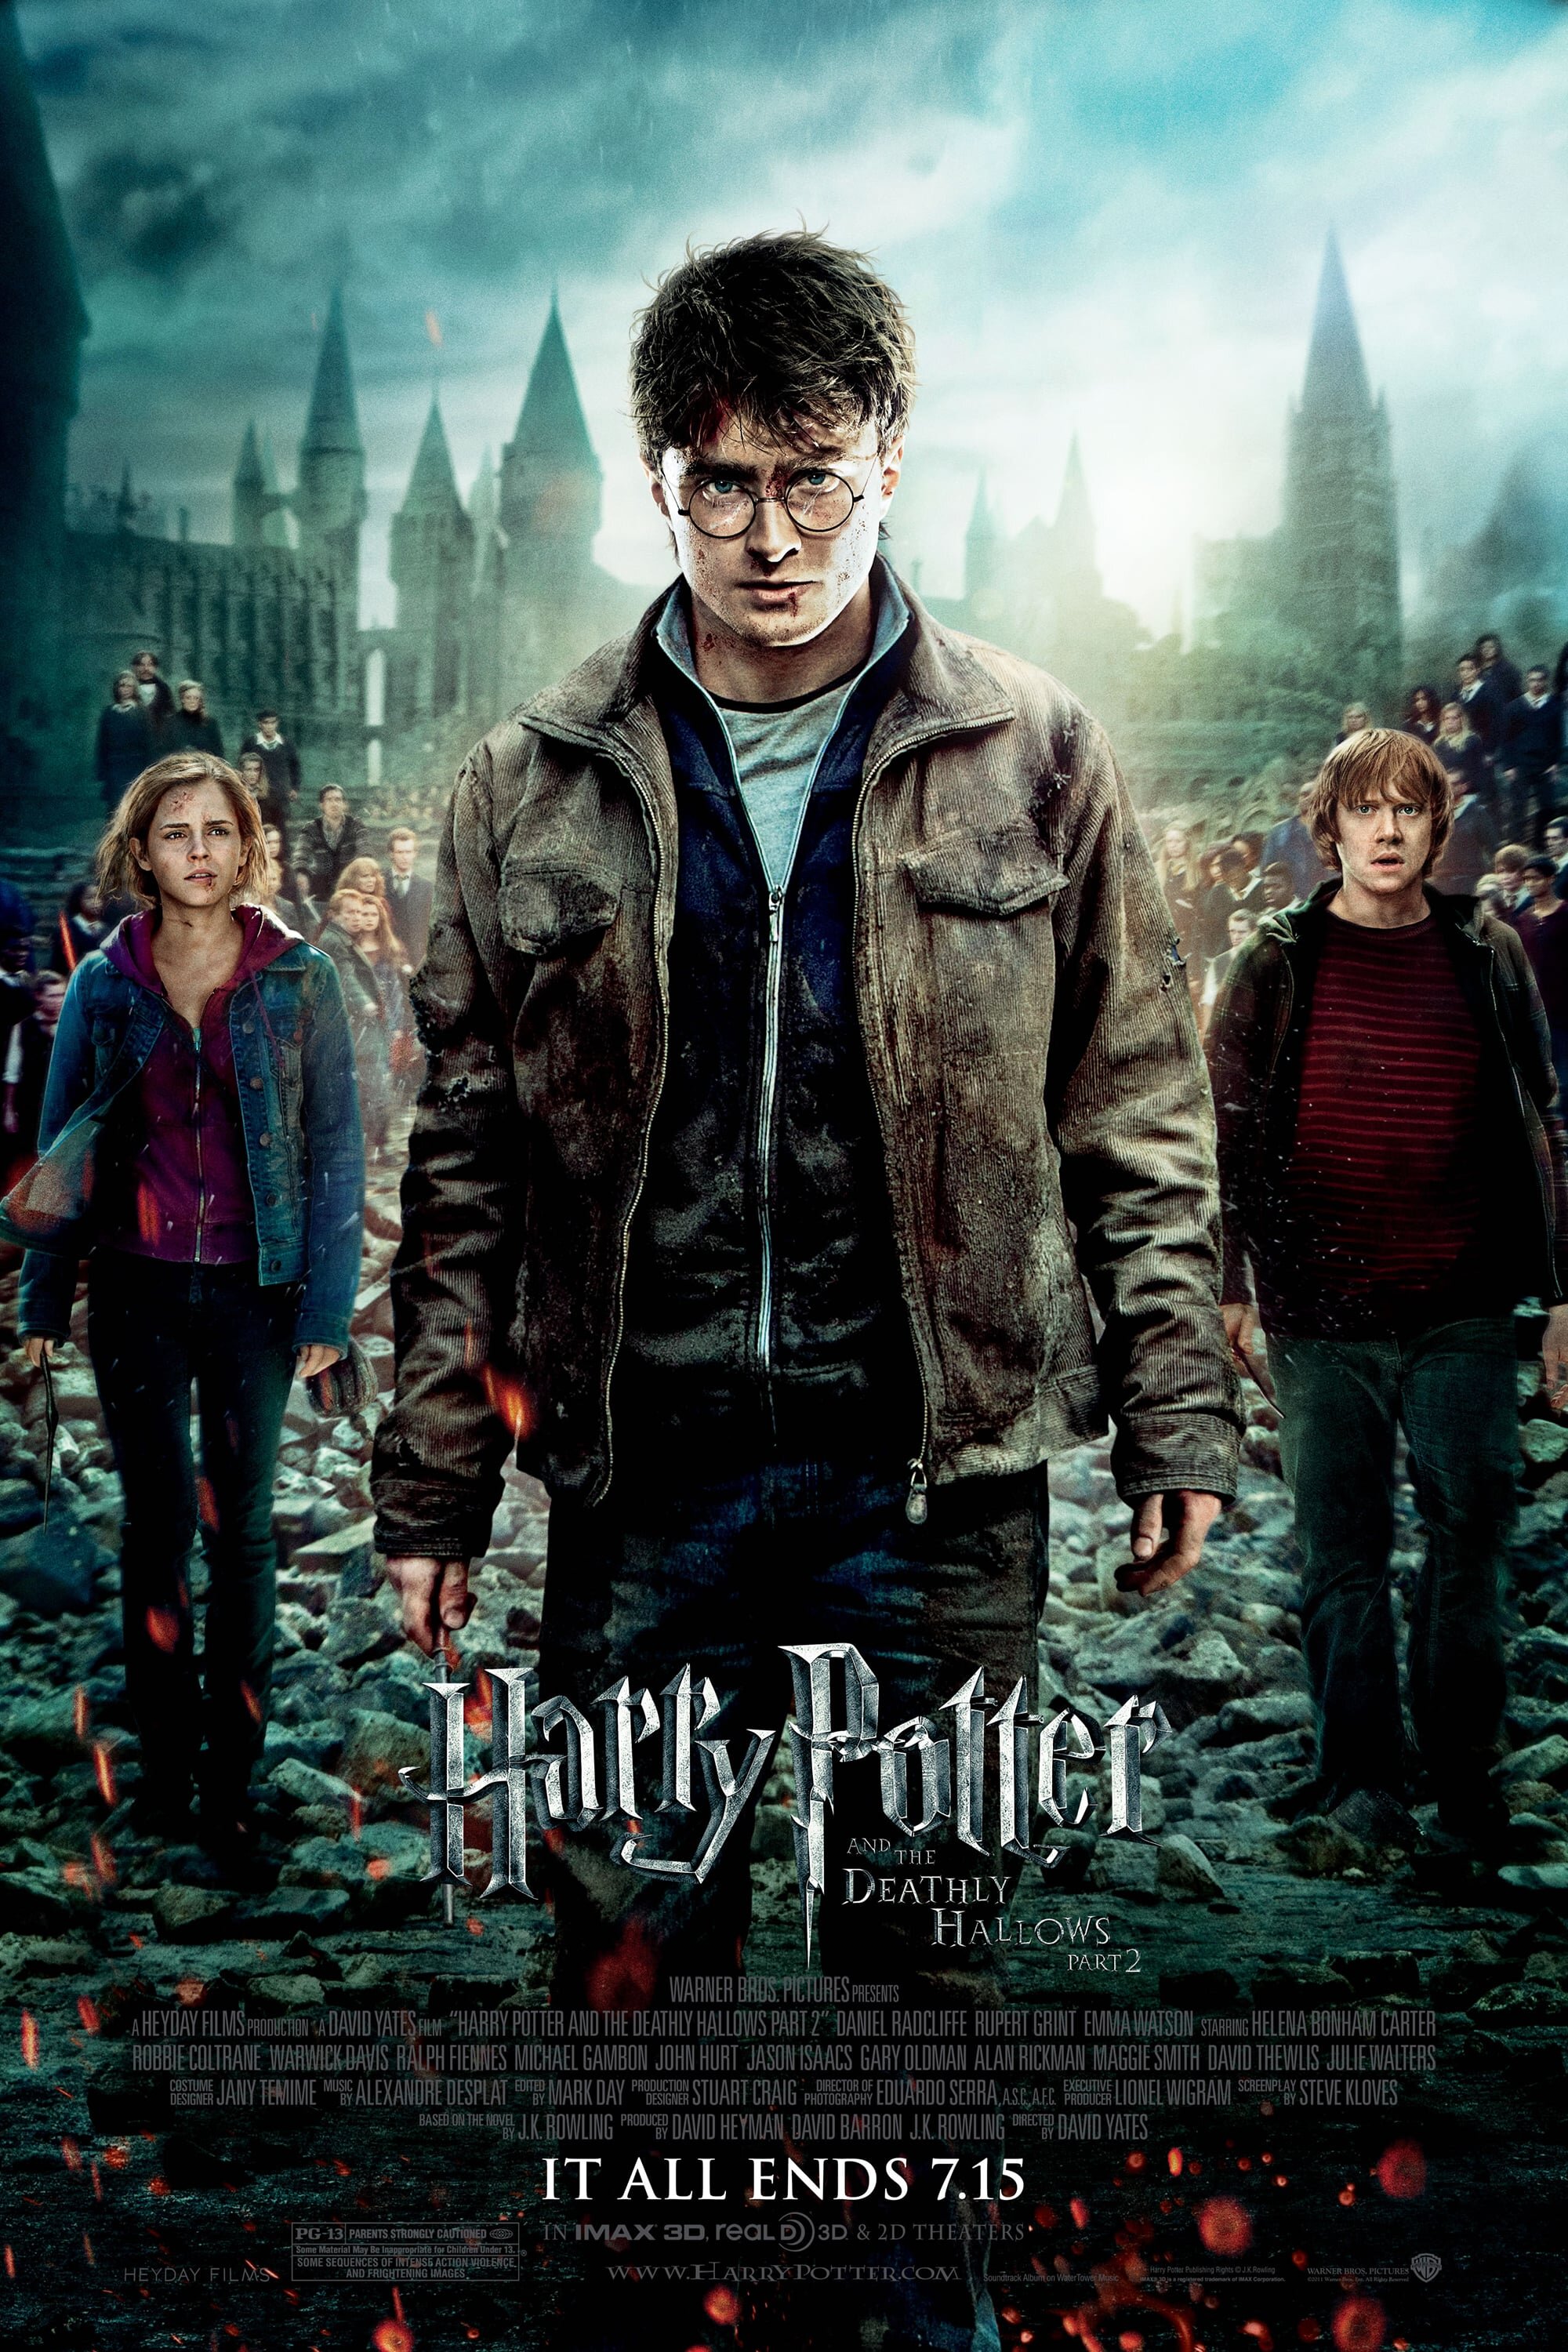 Harry Potter and the Deathly Hallows Part 2 poster.jpg